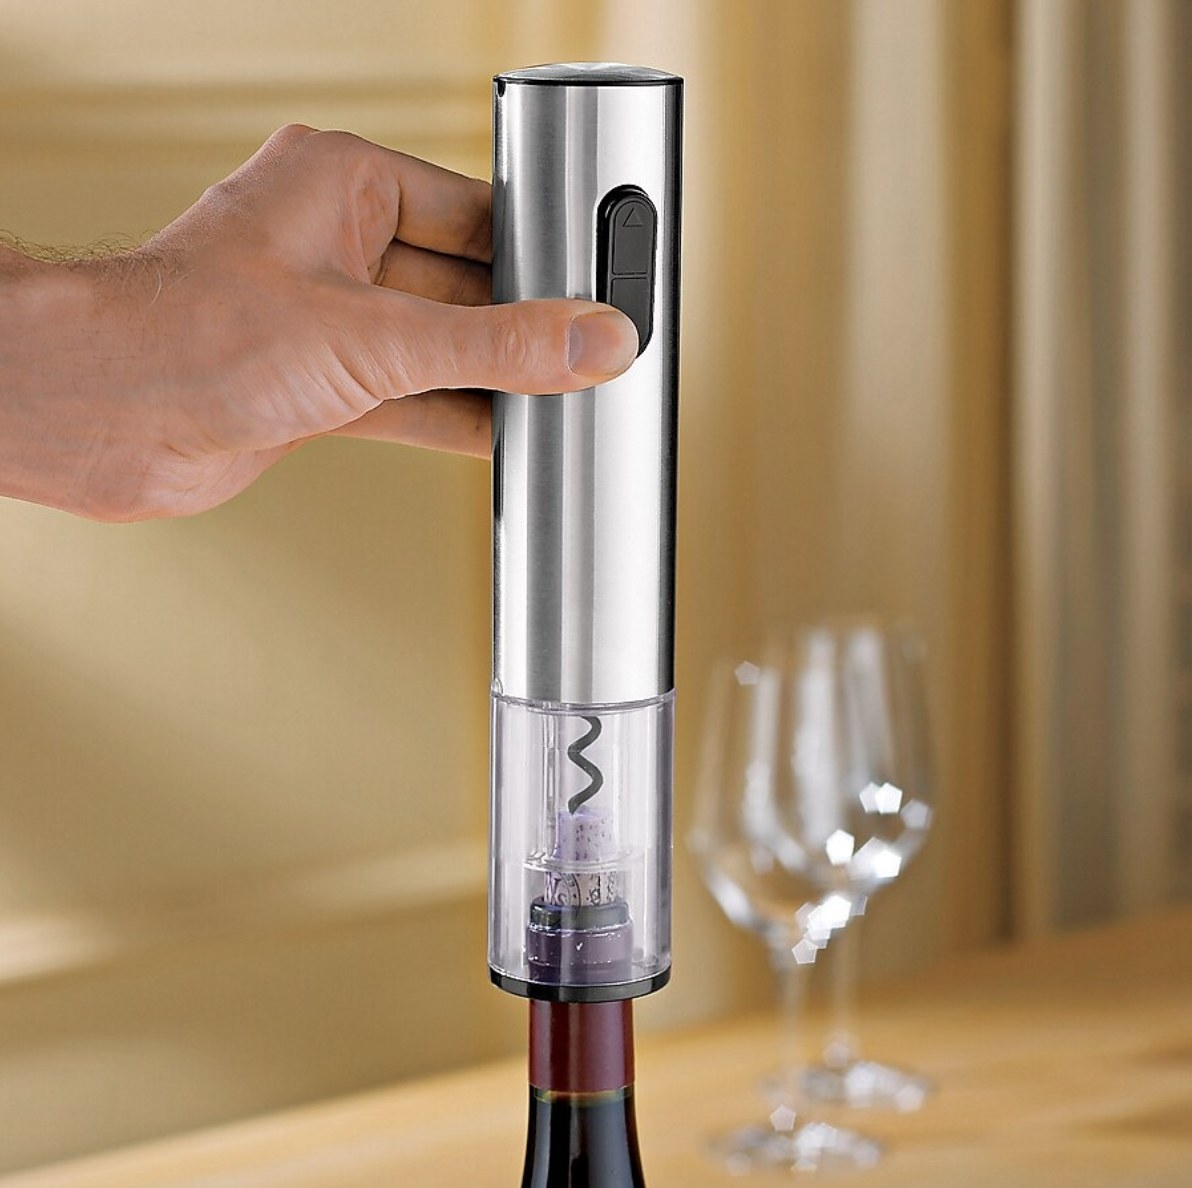 a person using an electric bottle opener to open a wine bottle